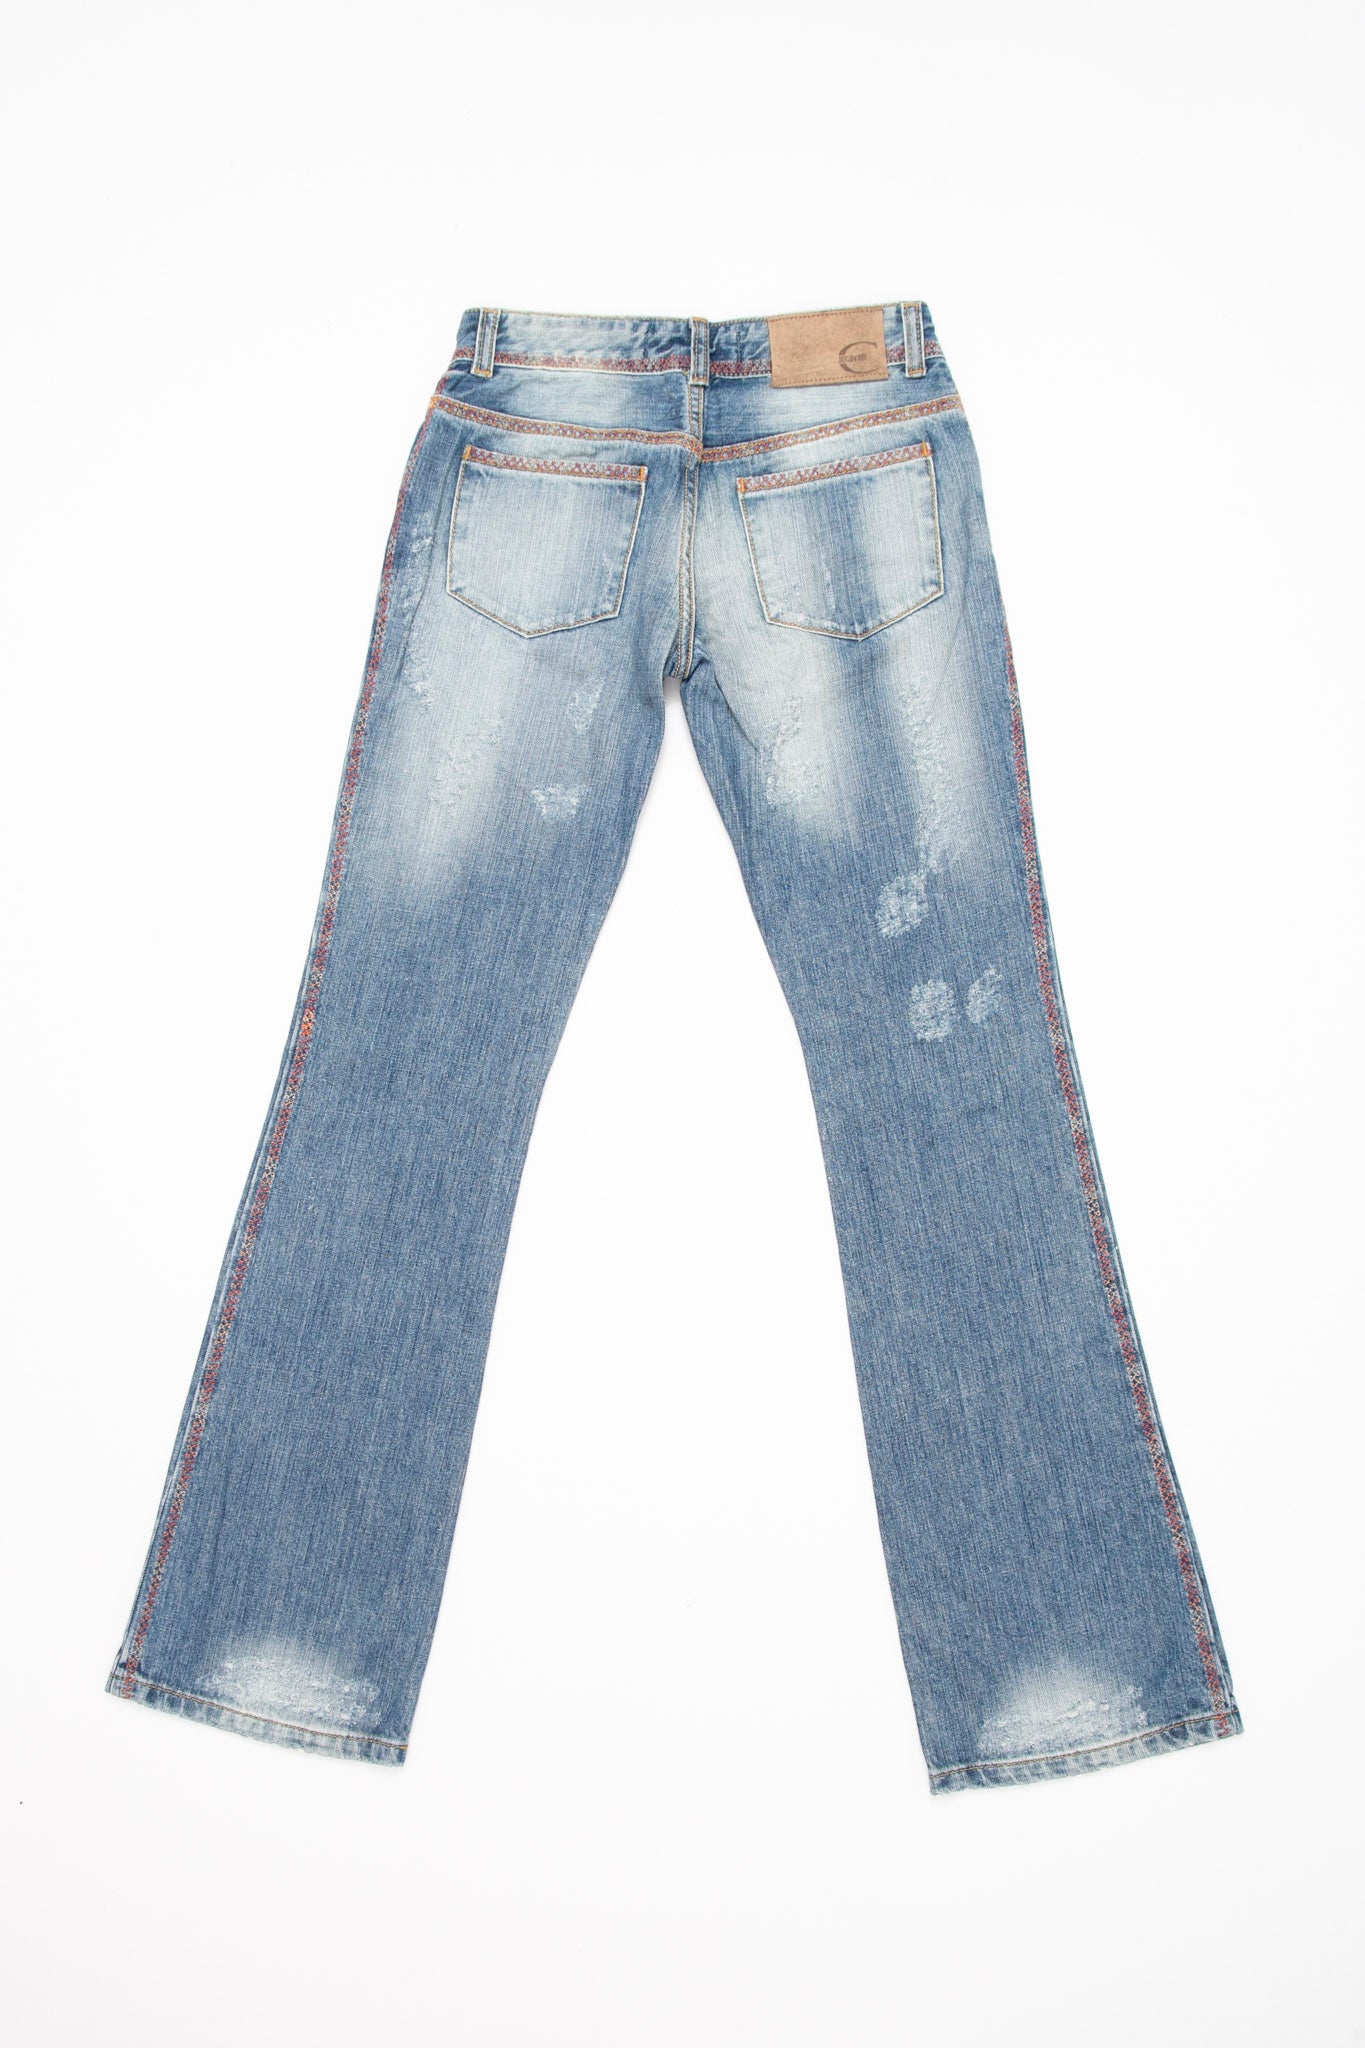 Cavalli Bright Washed Jeans